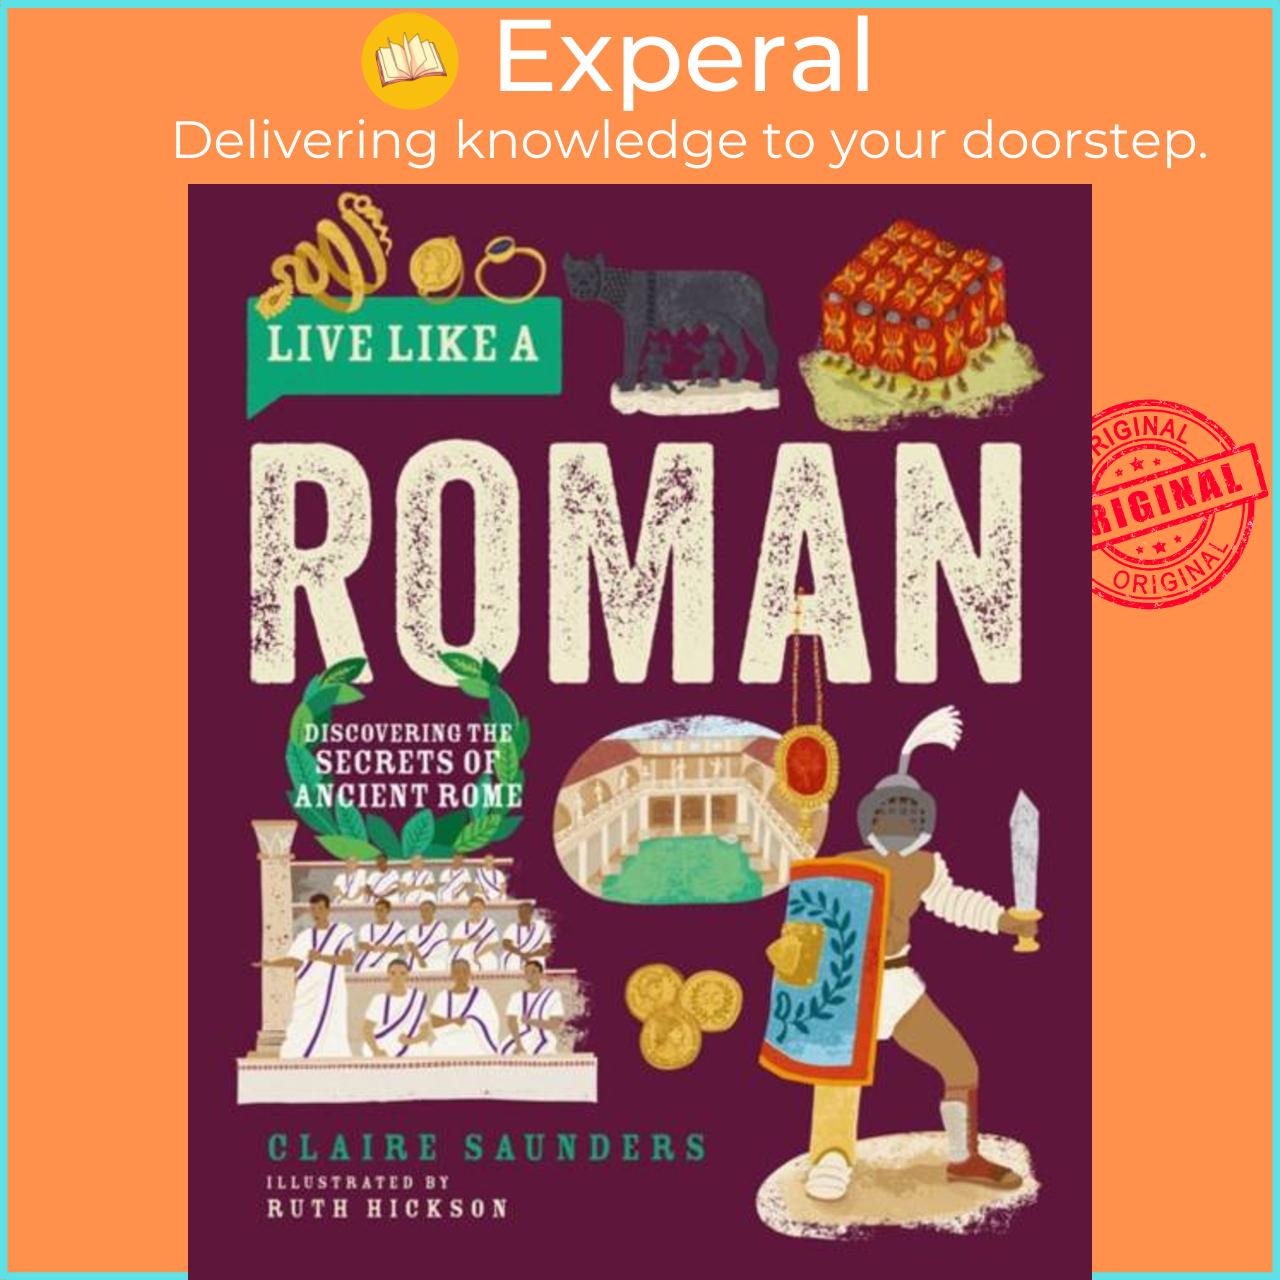 Sách - Live Like a Roman - Discovering the Secrets of Ancient Rome by Ruth Hickson (UK edition, hardcover)